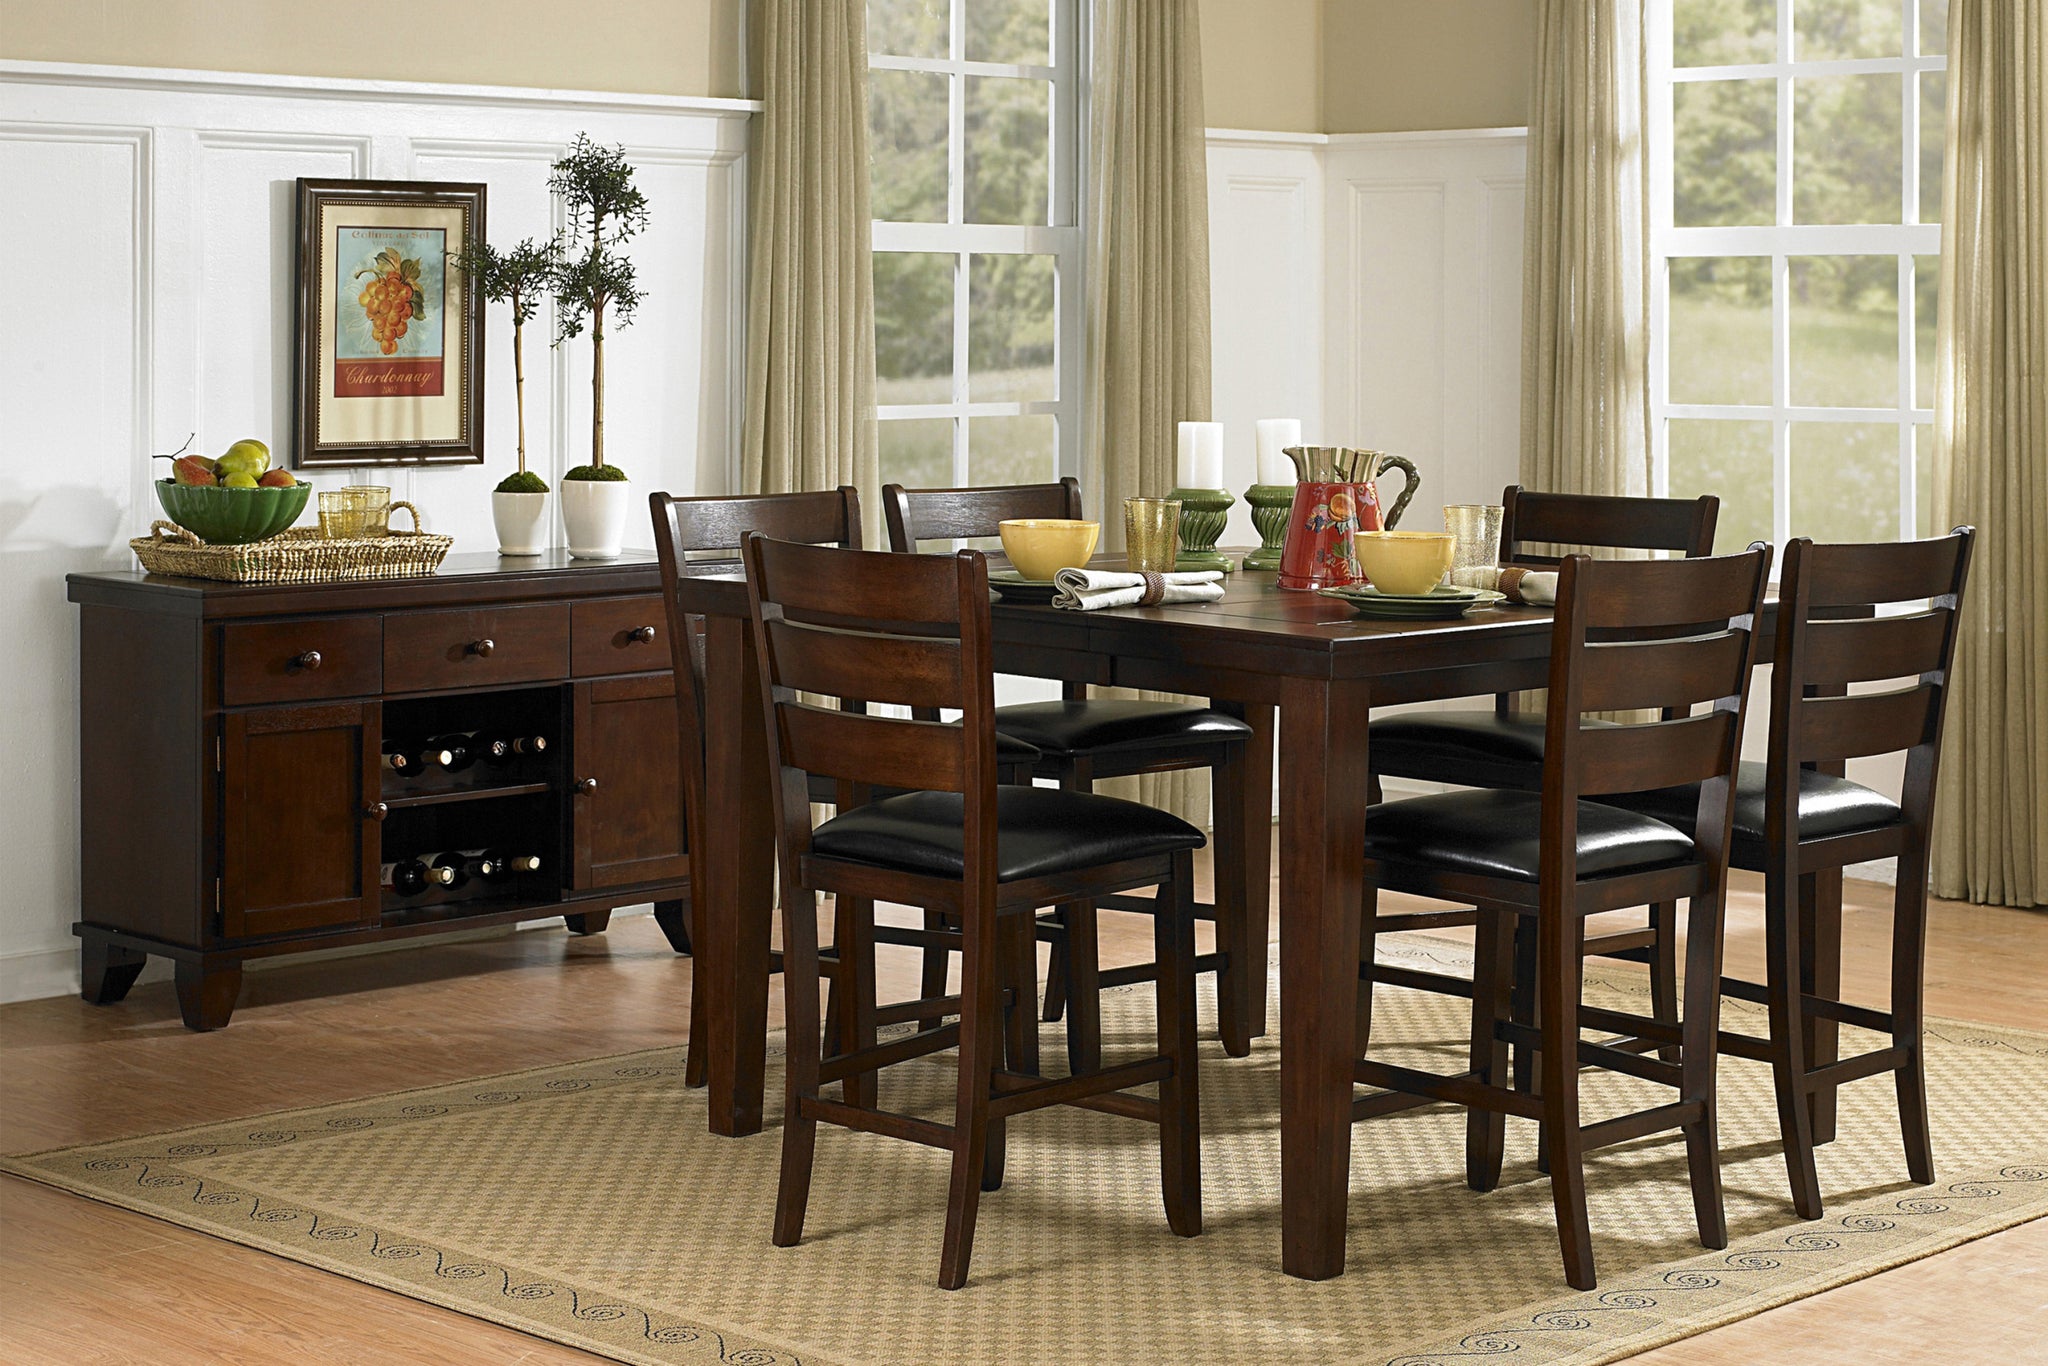 Contemporary Dining 7pc Set Counter Height Table w wood-wood-oak-ladder back-seats 6-wood-dining